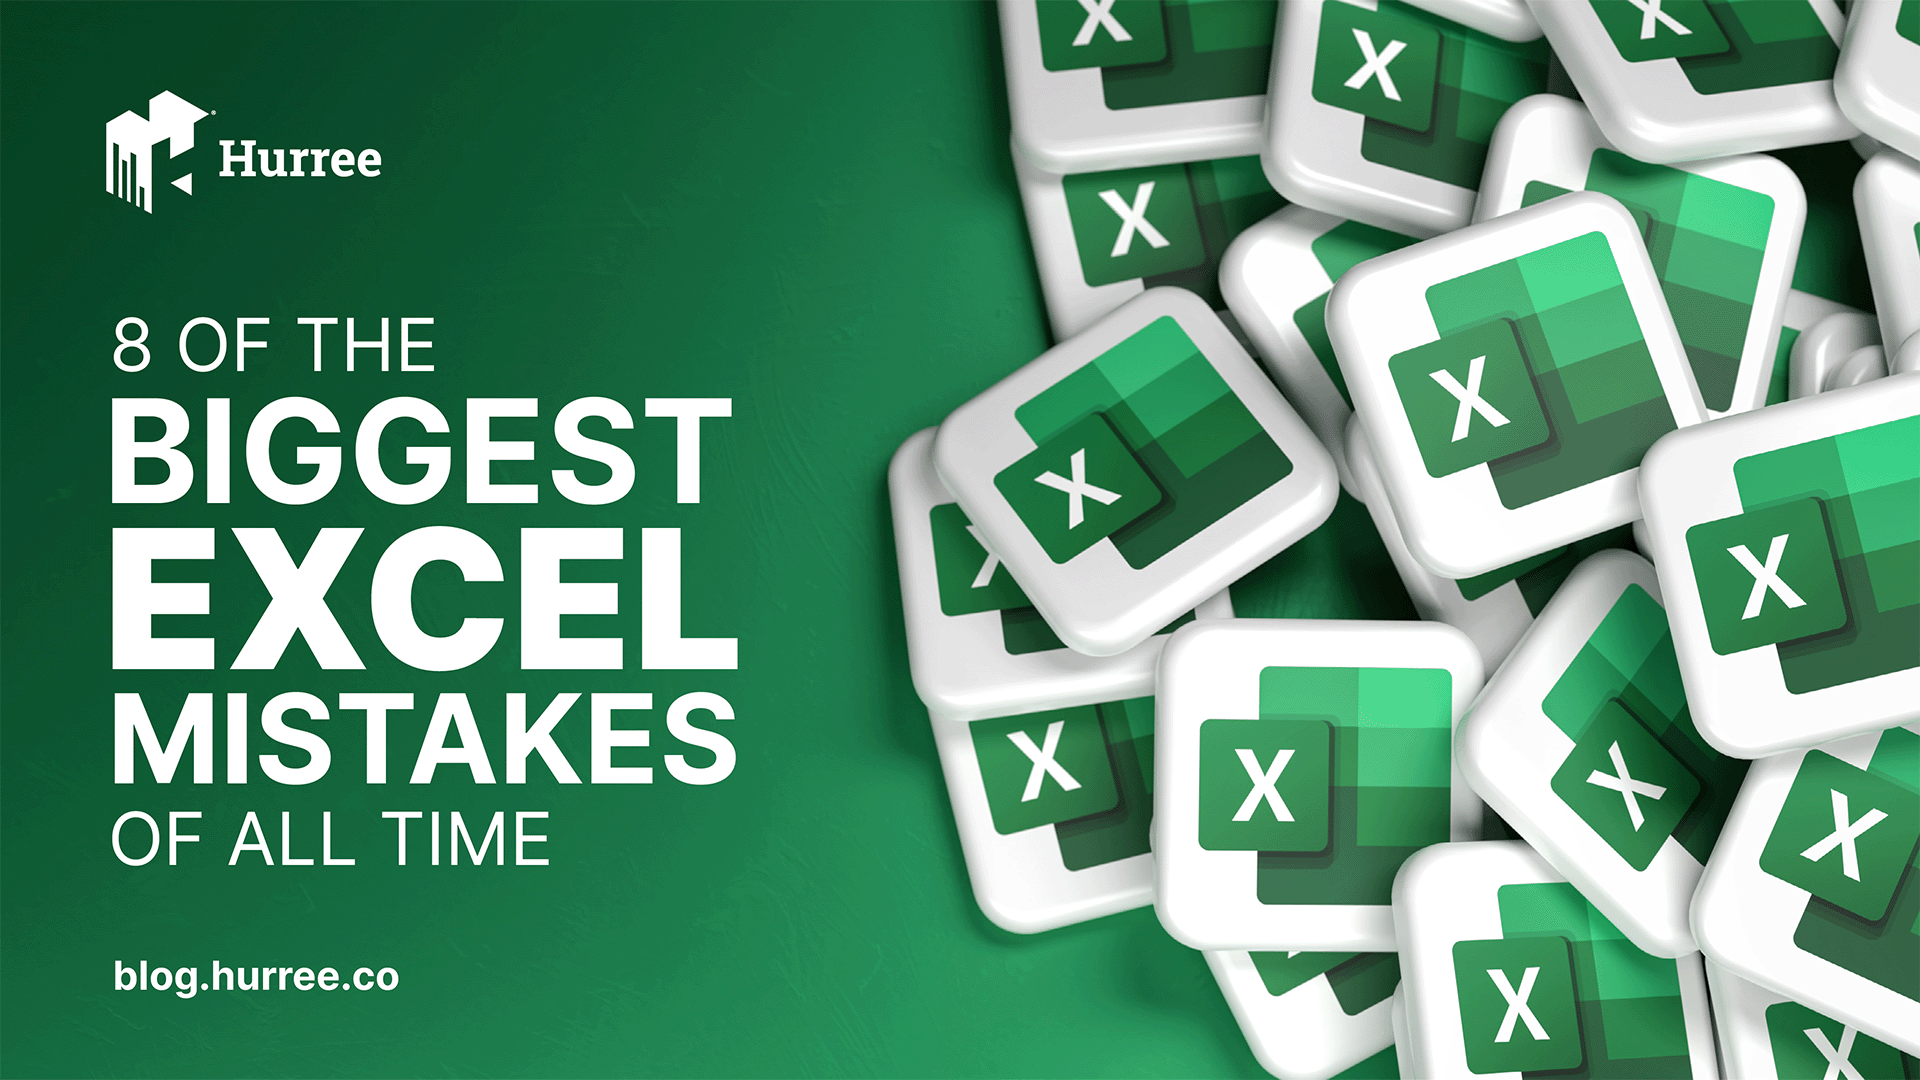 8 of the Biggest Excel Mistakes of All Time